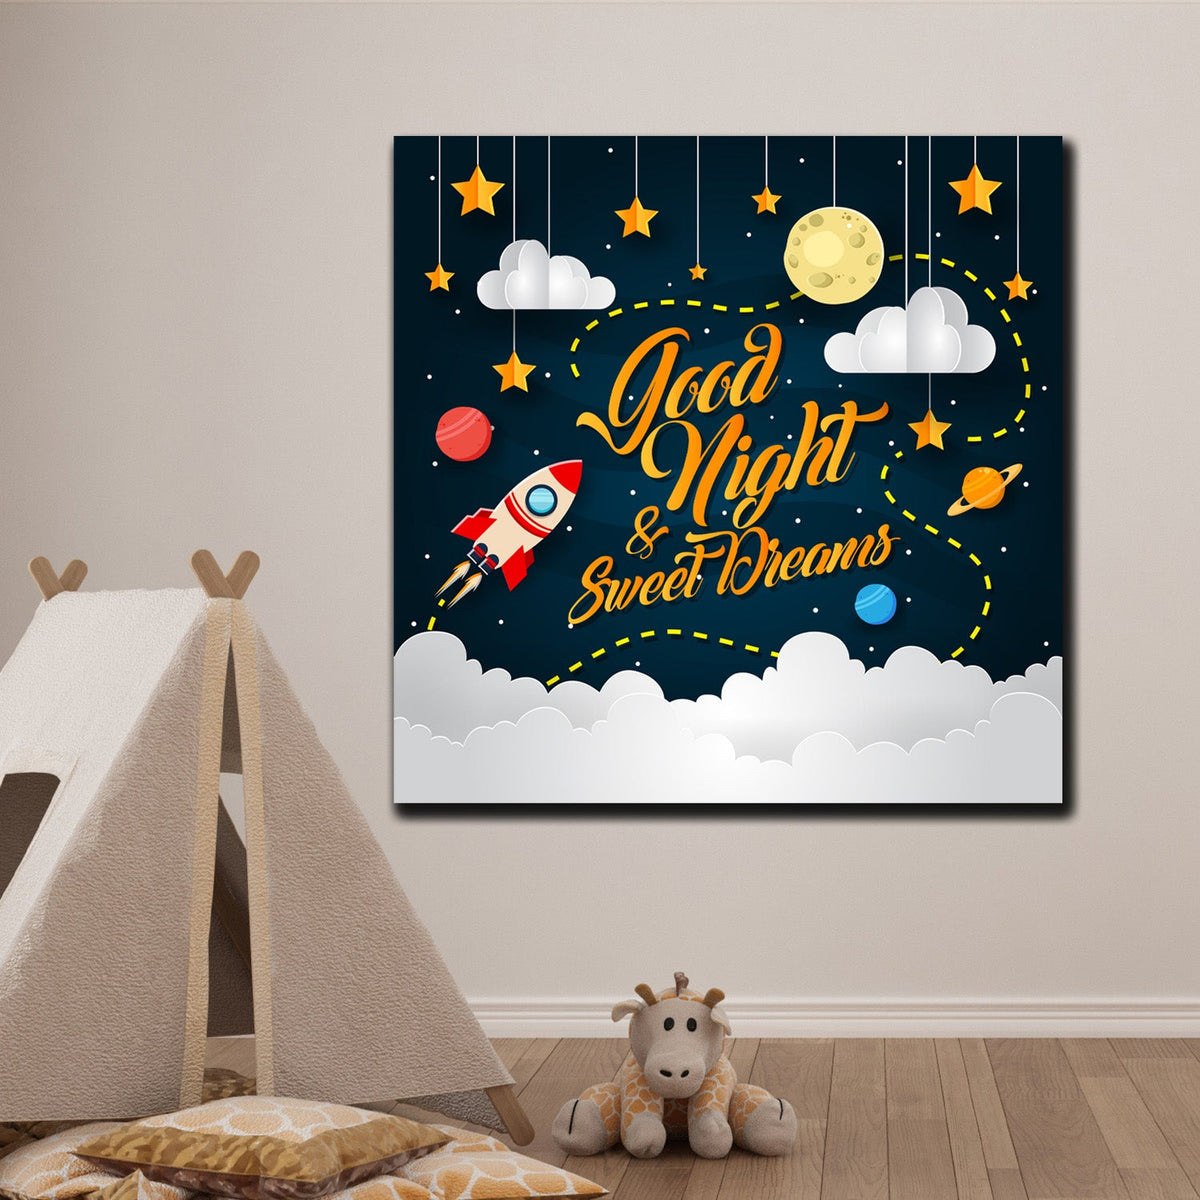 https://cdn.shopify.com/s/files/1/0387/9986/8044/products/GoodNight_SweetDreamsCanvasArtprintStretched-3.jpg